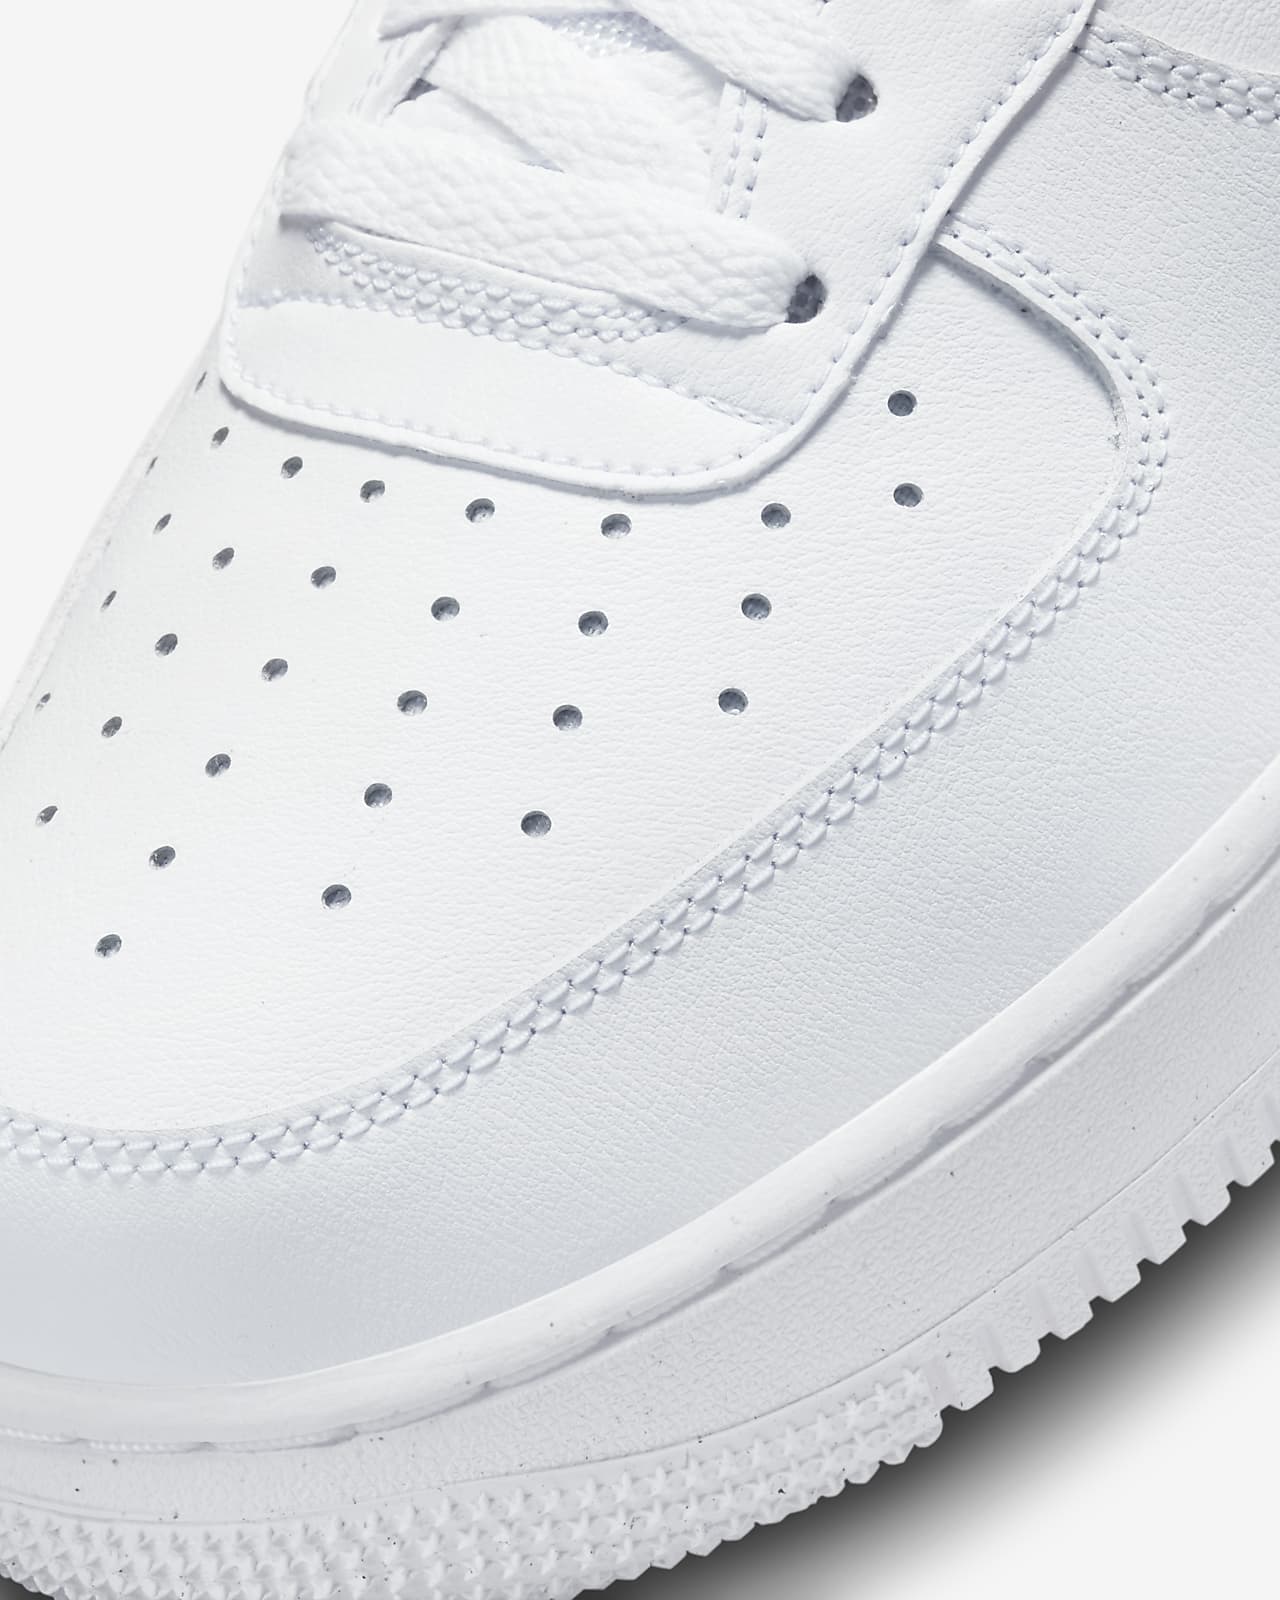 Nike Air af1 all white Force 1 '07 Men's Shoes. Nike LU